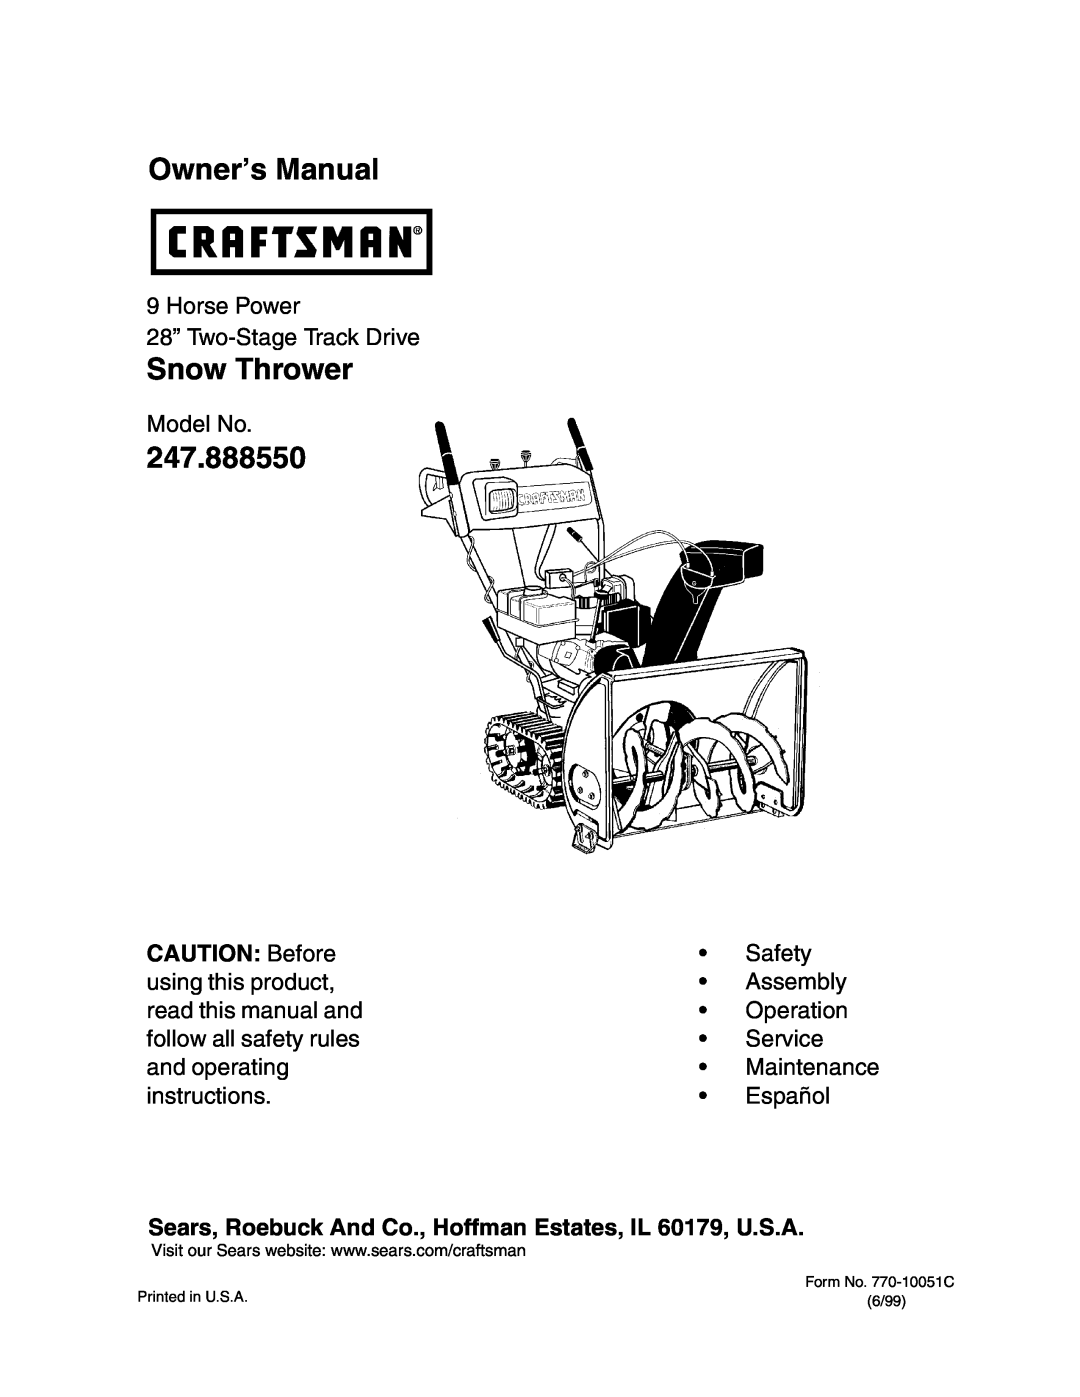 Craftsman owner manual Owner’s Manual, Snow Thrower, 247.888550, CAUTION Before 